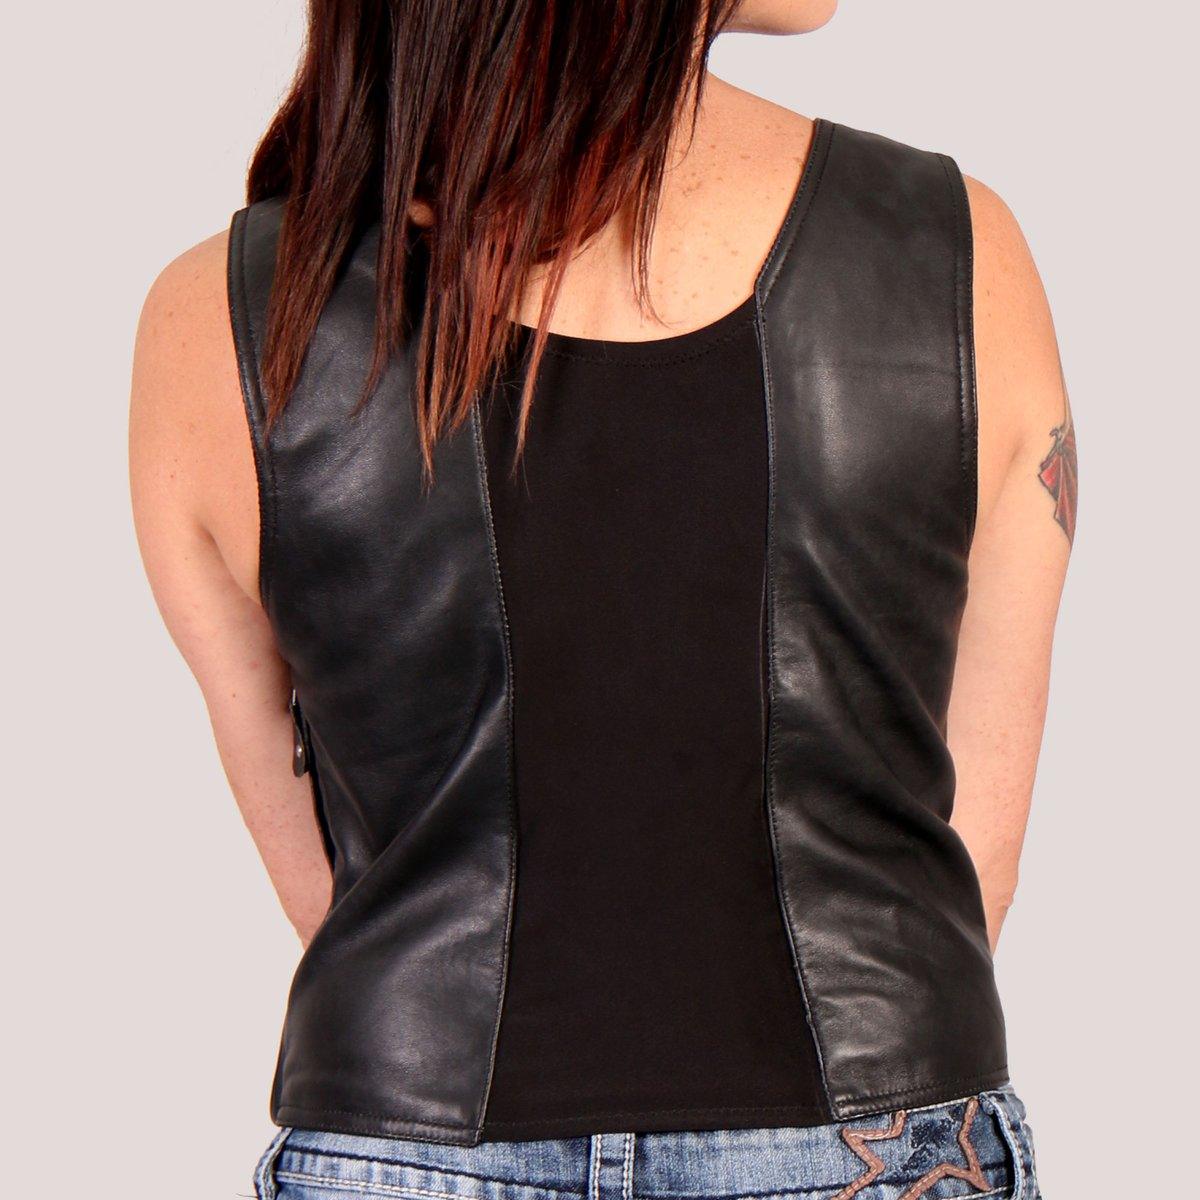 Ladies Hot Leathers Bodice Leather Top - Military Republic